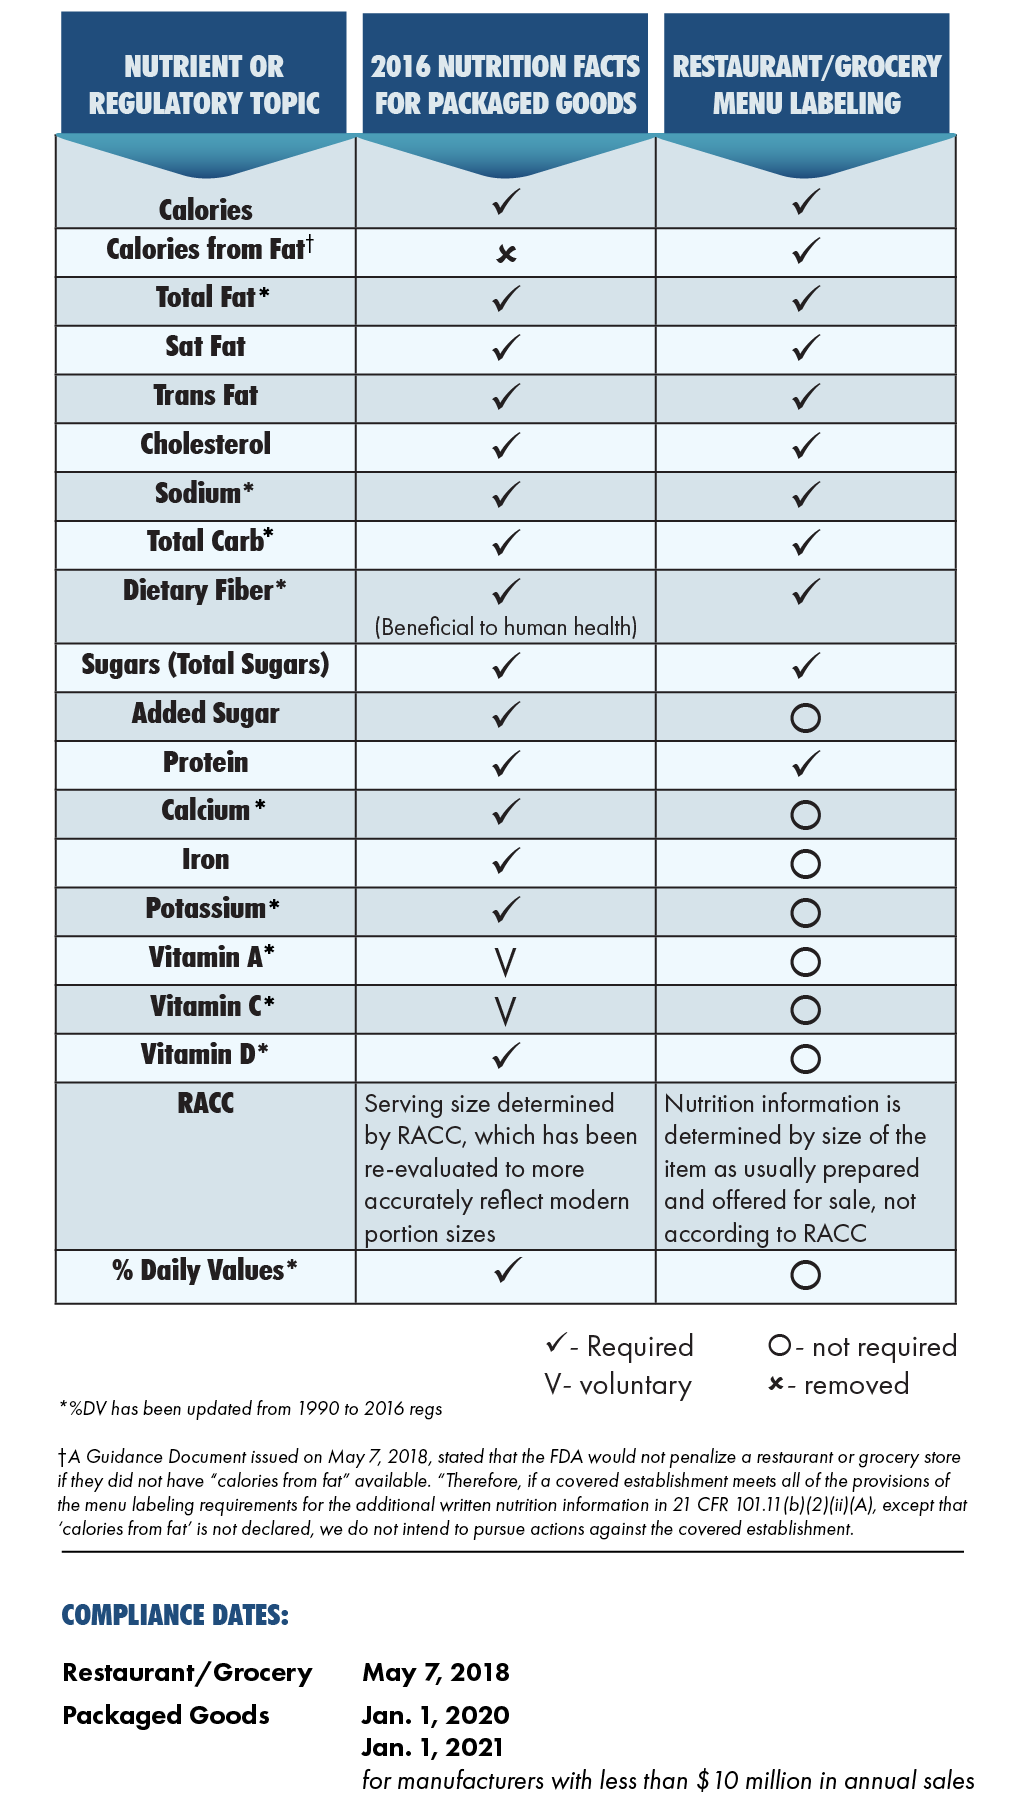 This table shows what is required for packaged food and menu labeling, and which regulatory topics cover each. Restaurants must be compliant by May 2018, while packaged food manufacturers must be compliant by January 2020 and 2021.